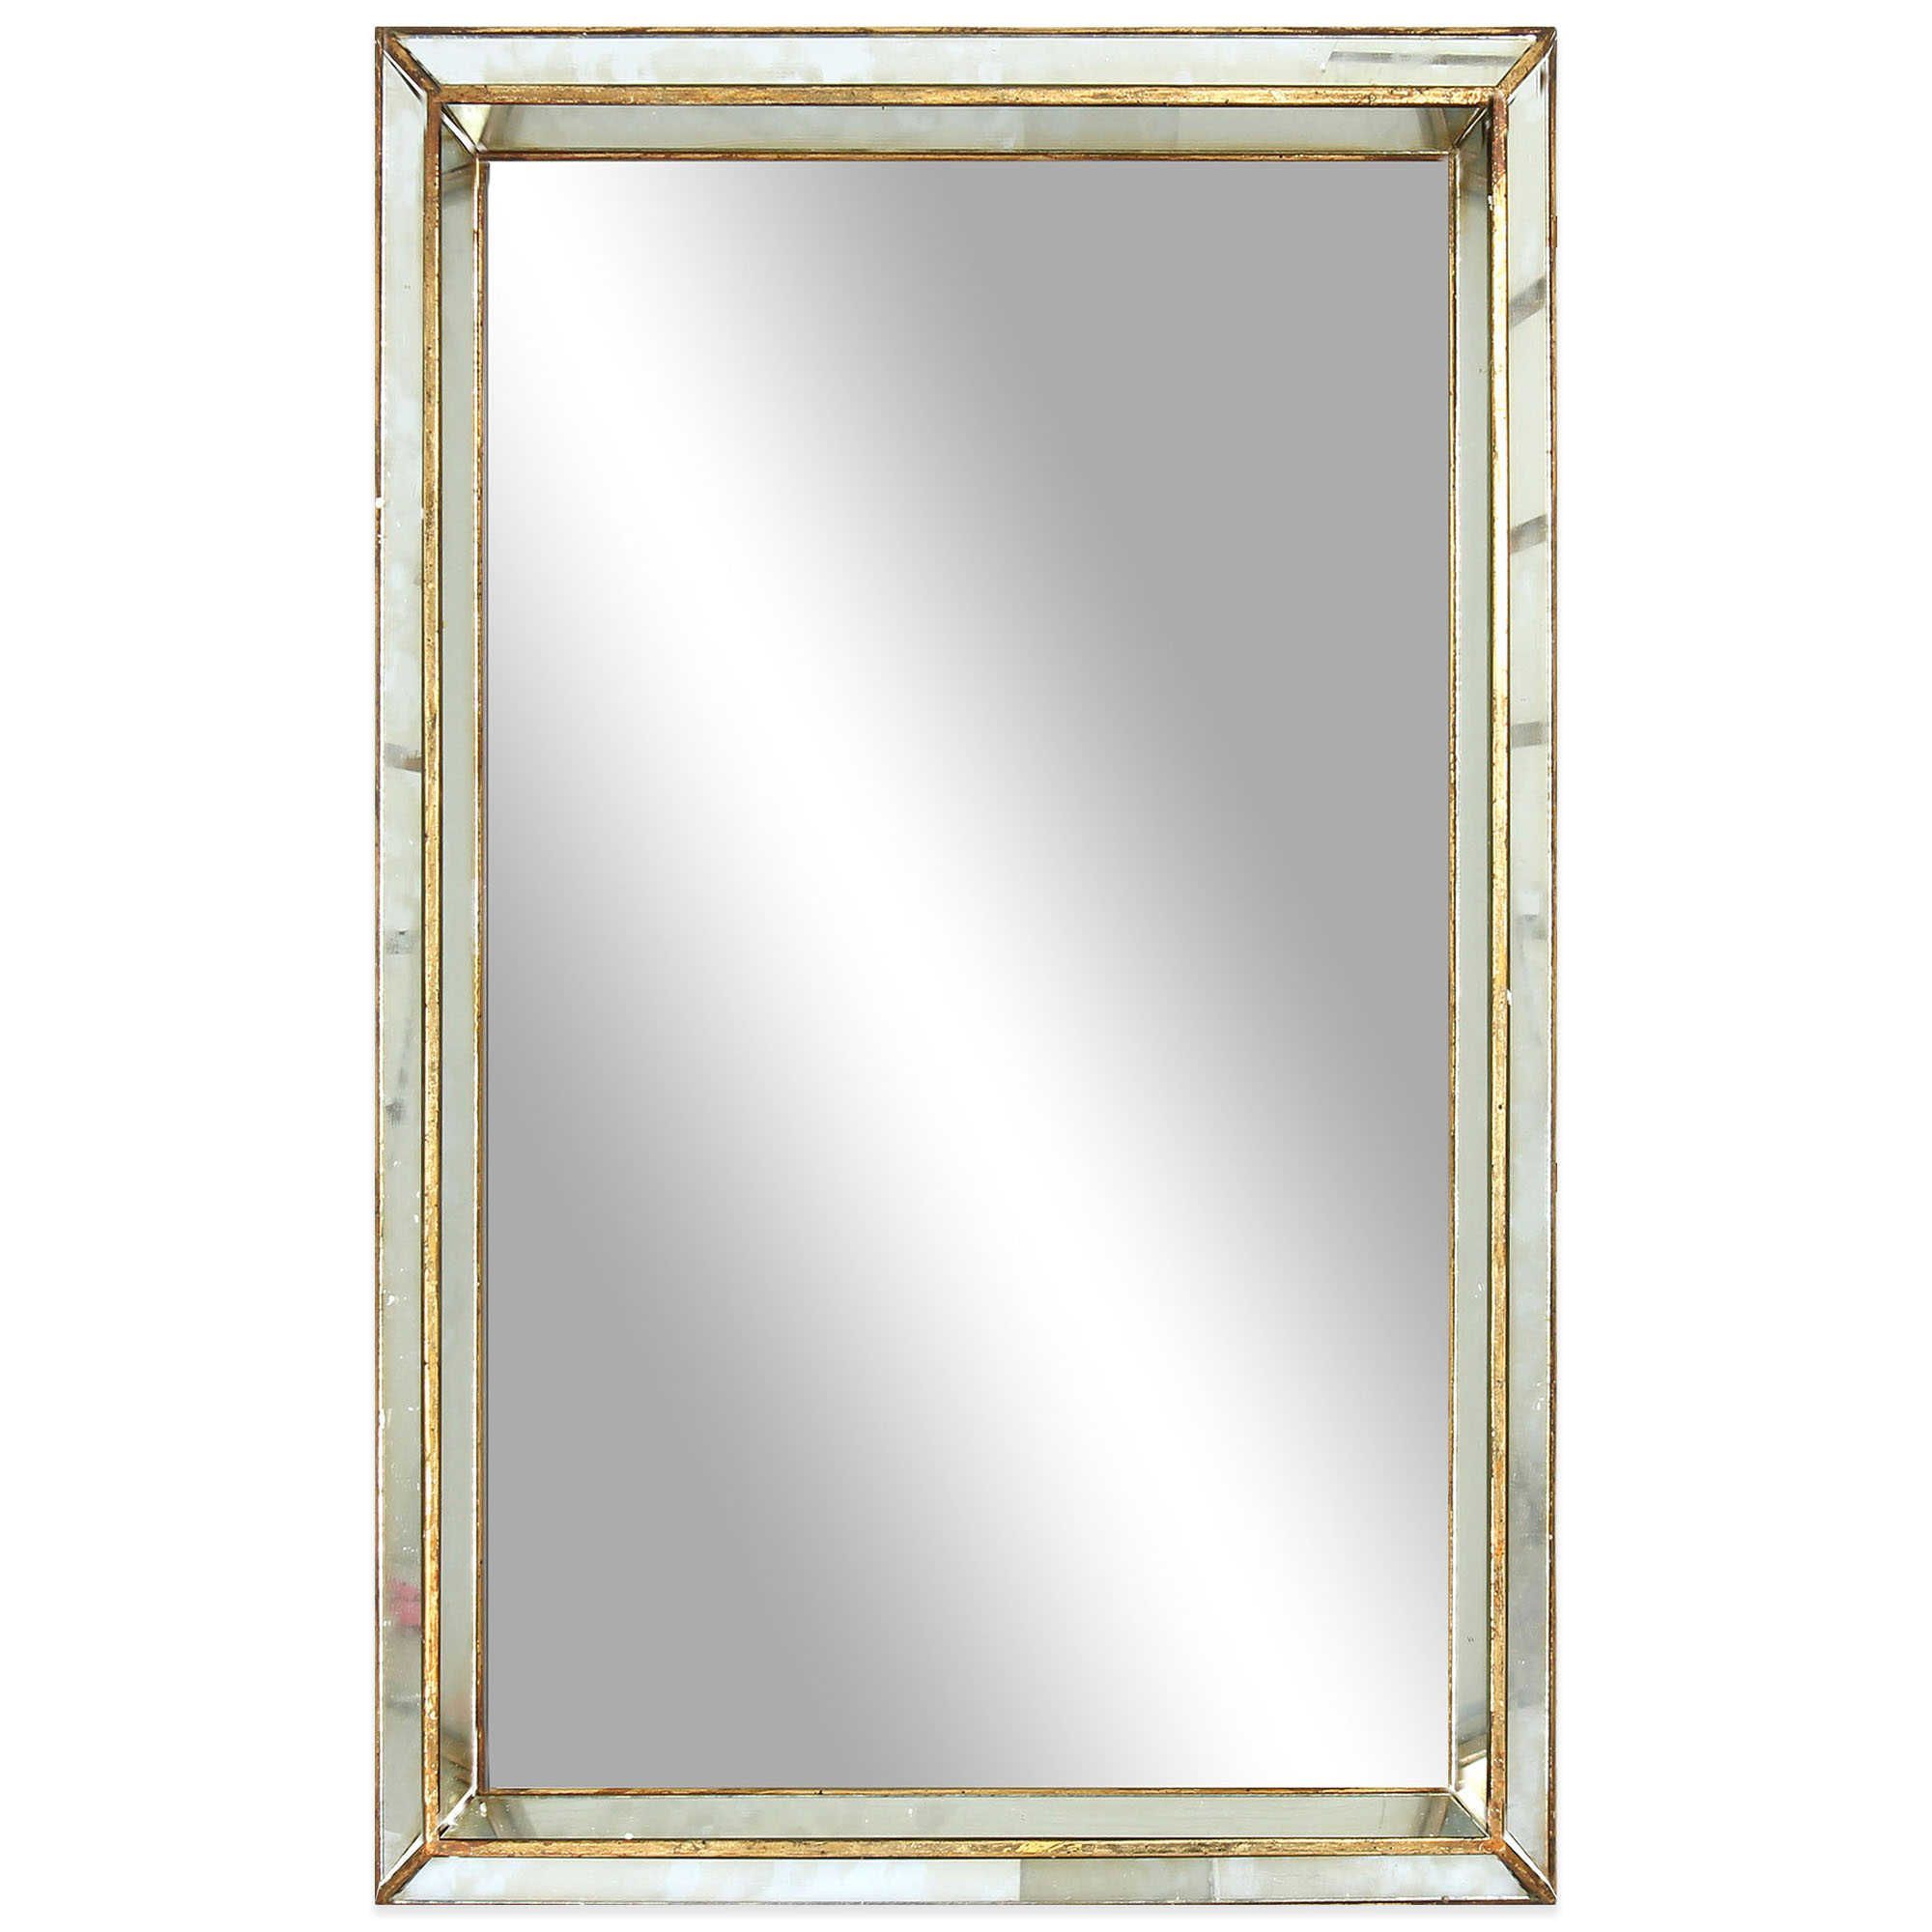 Invalid Url | Antique Gold Mirror, Large Mirror, Rectangular Mirror Intended For Ultra Brushed Gold Rectangular Framed Wall Mirrors (View 7 of 15)